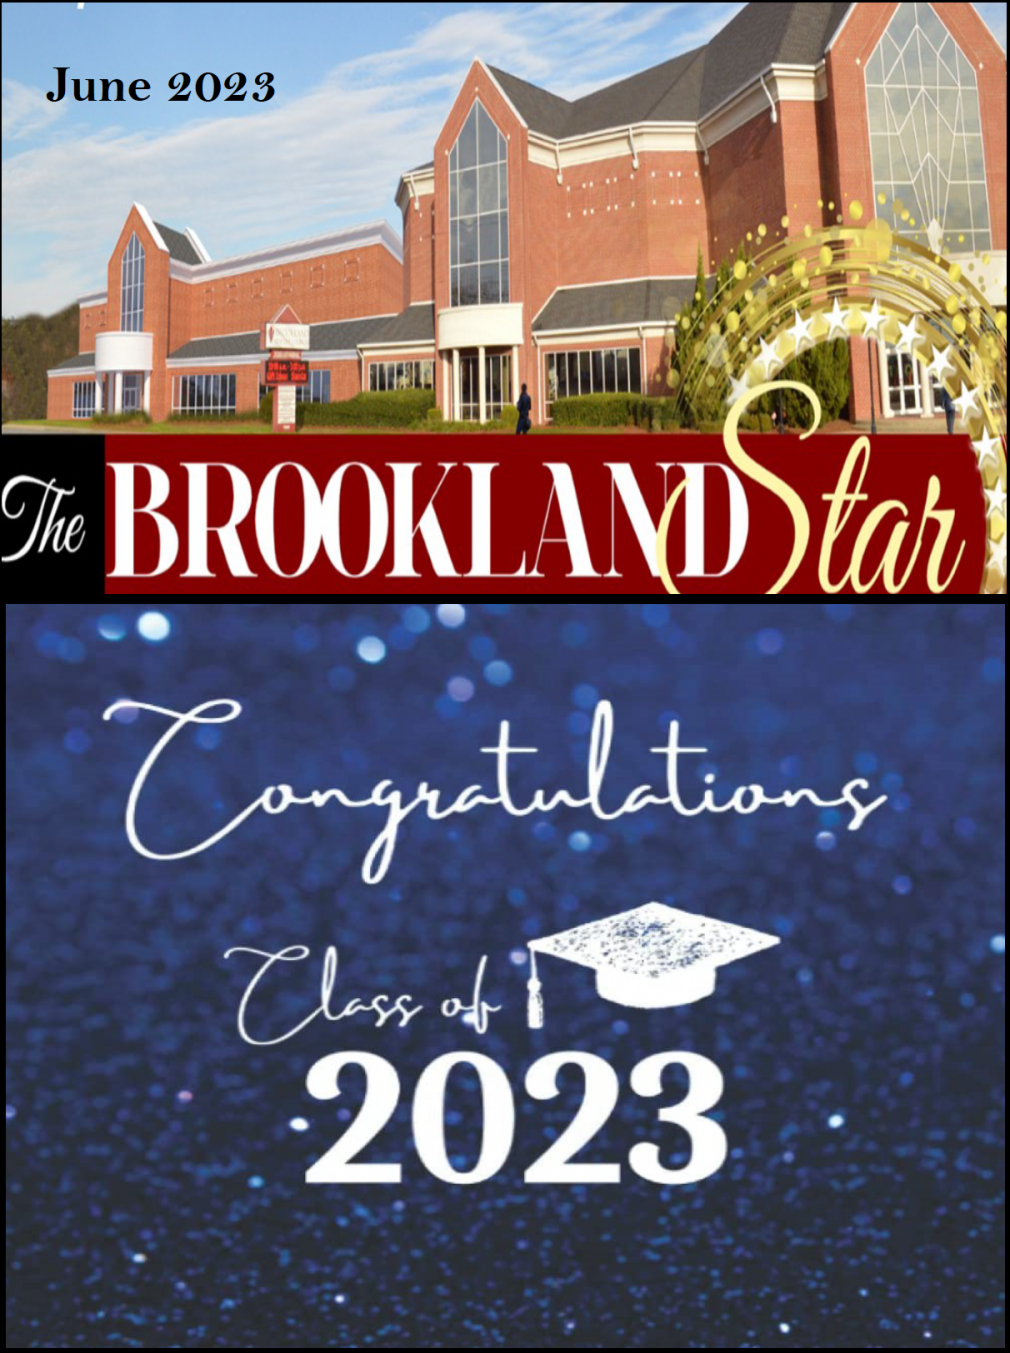 The Brookland Star June 2023 Edition